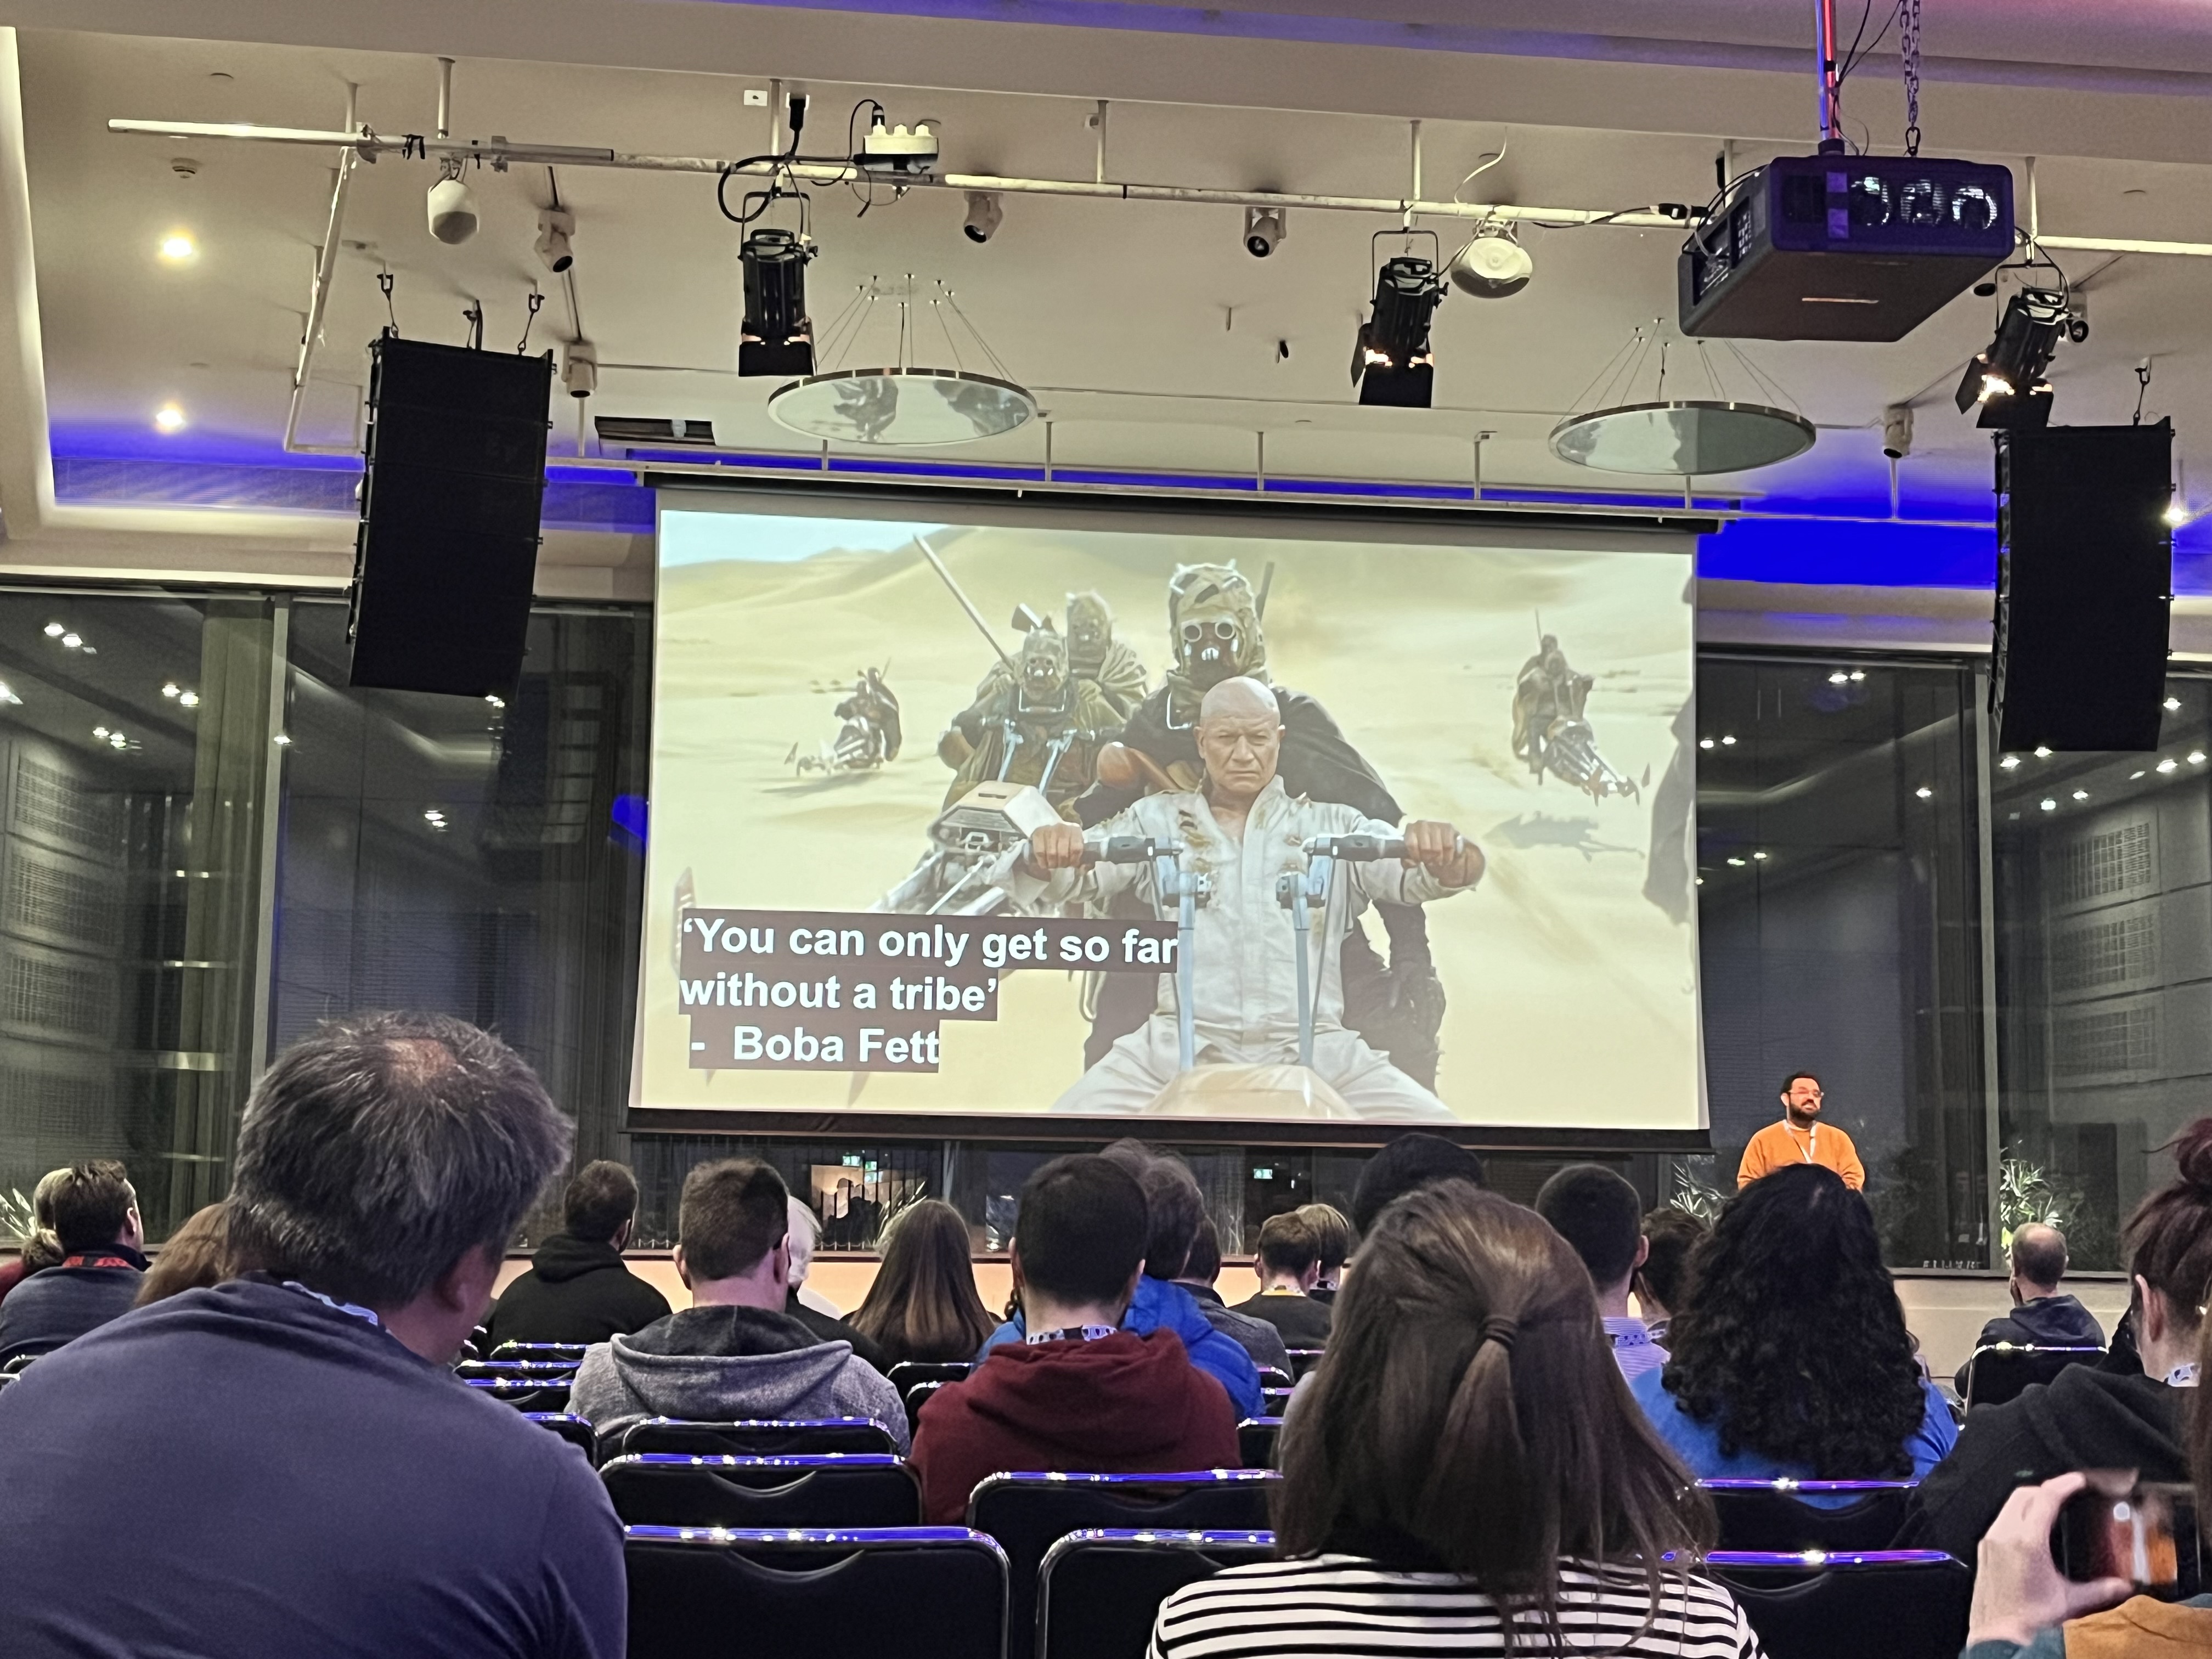 screen showing “you can only get so far without a tribe” – an important takeaway from the event